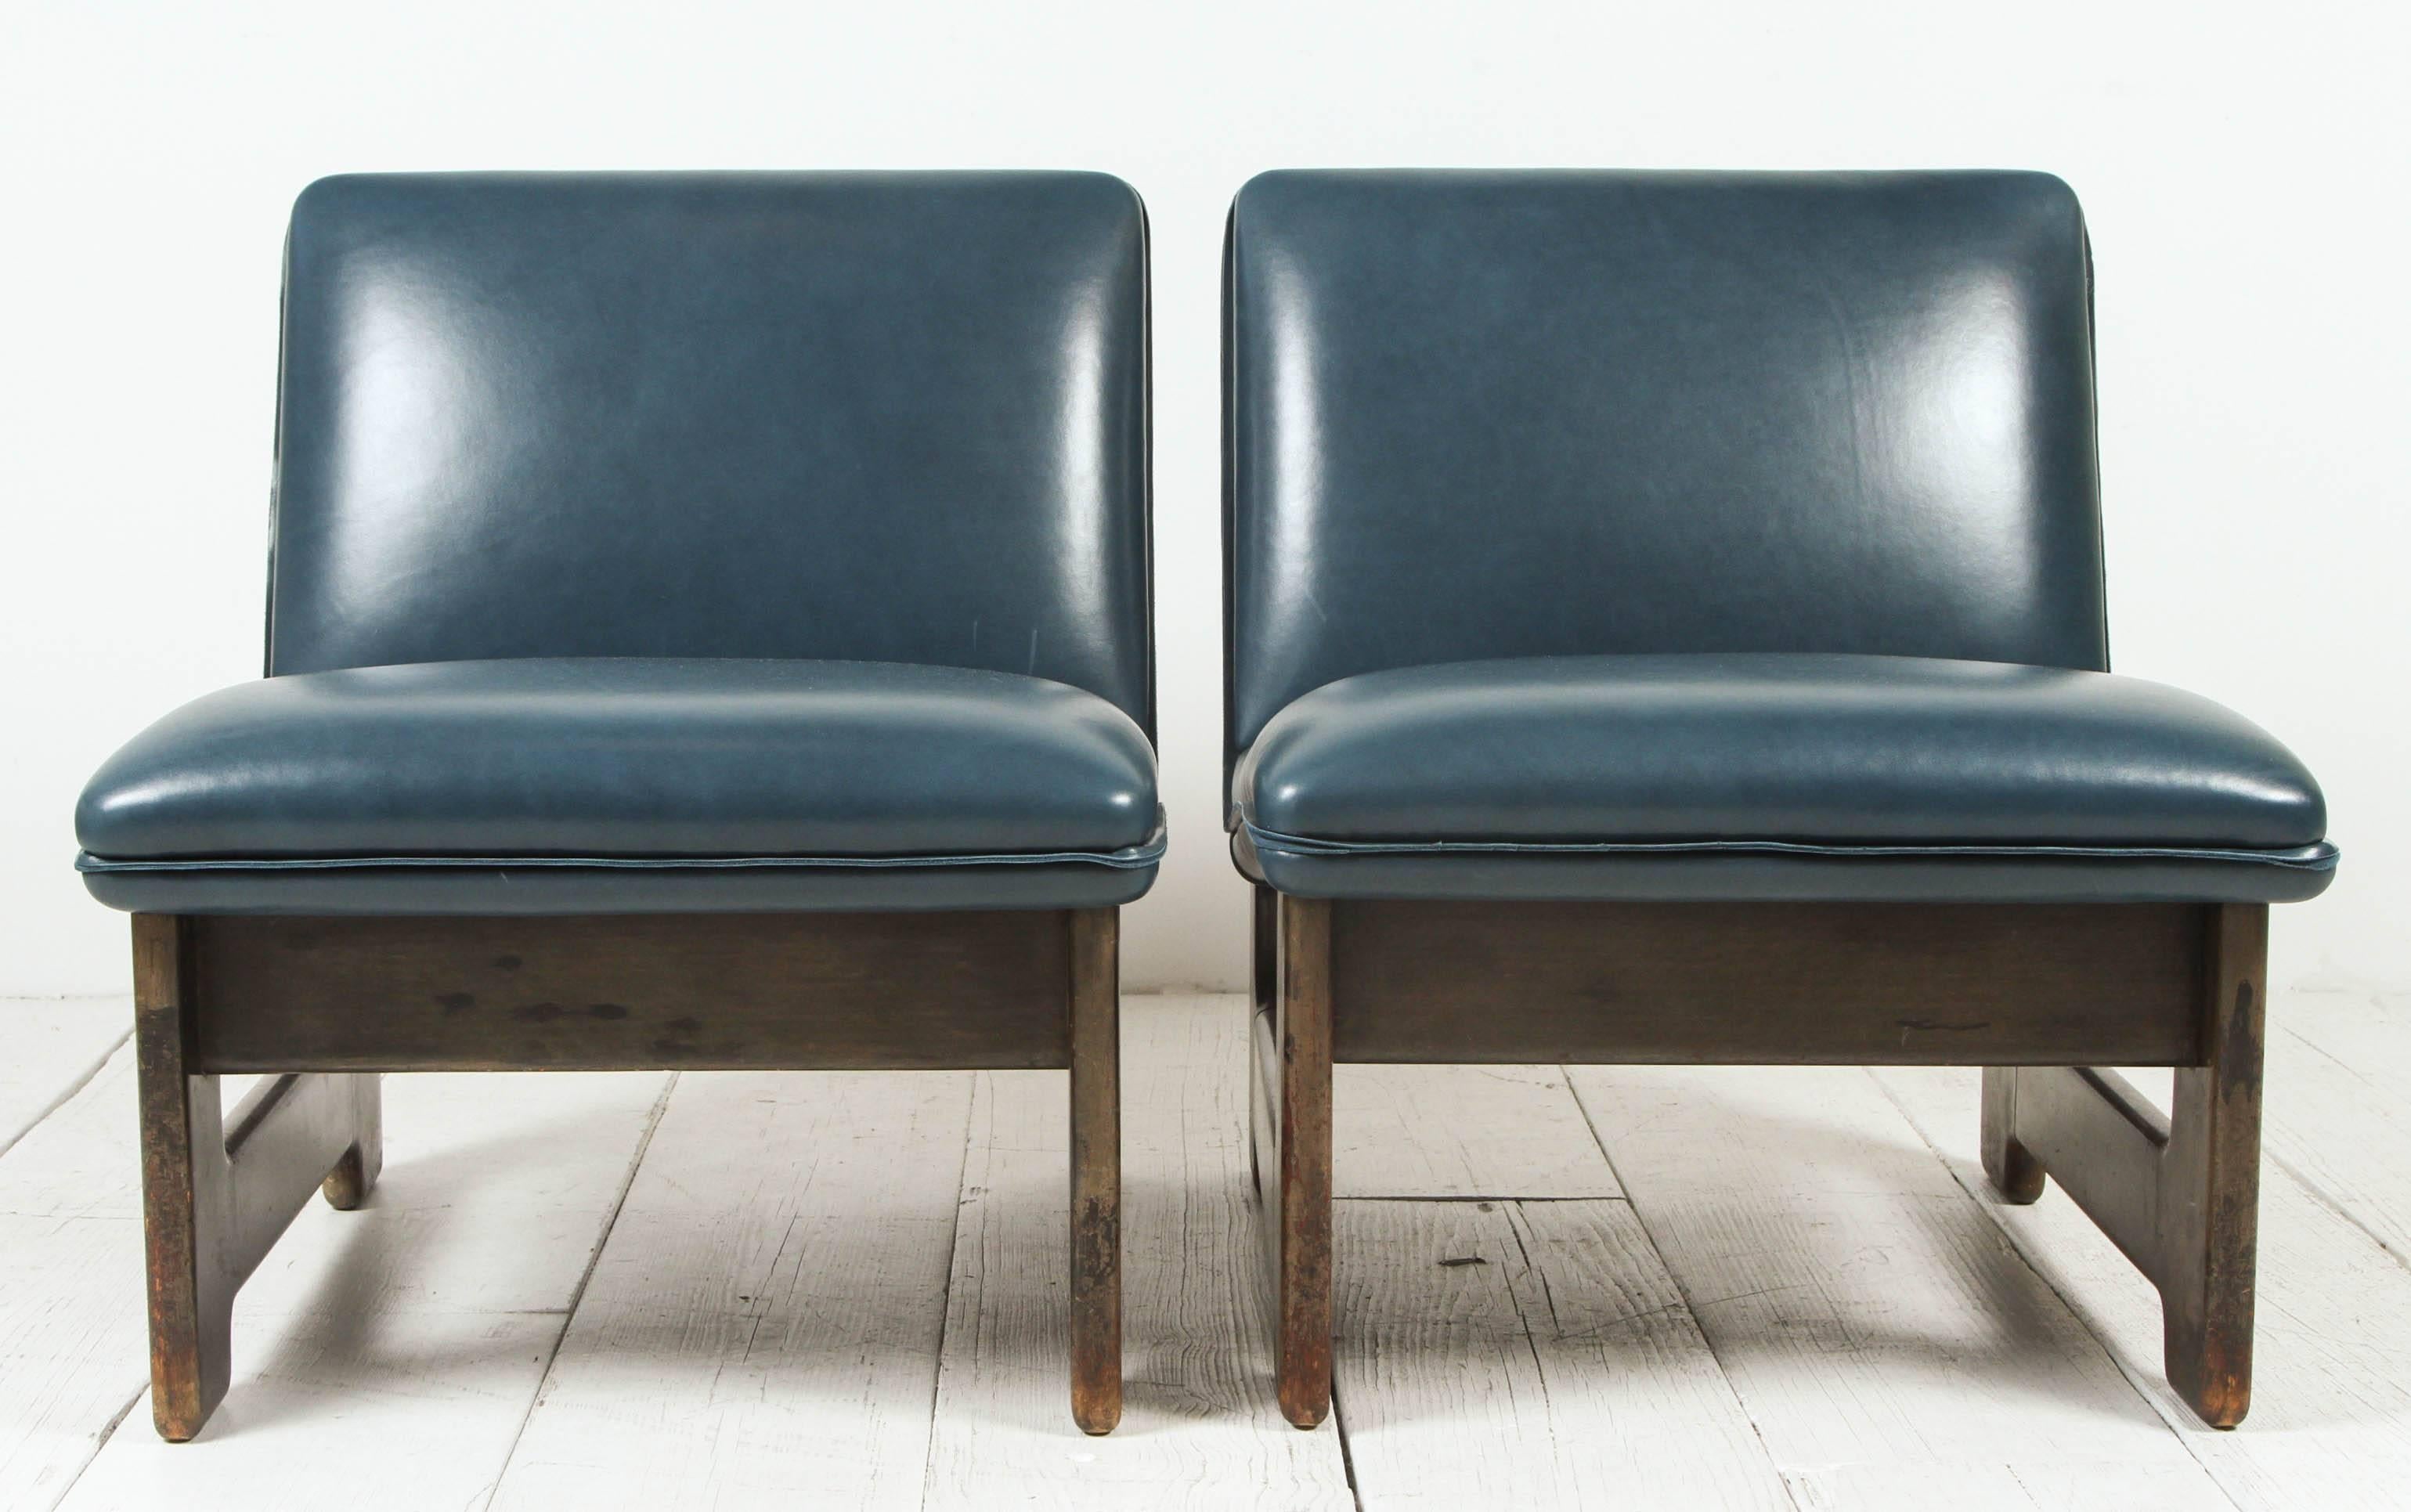 Pair of Italian wood framed chairs upholstered in navy blue leather.